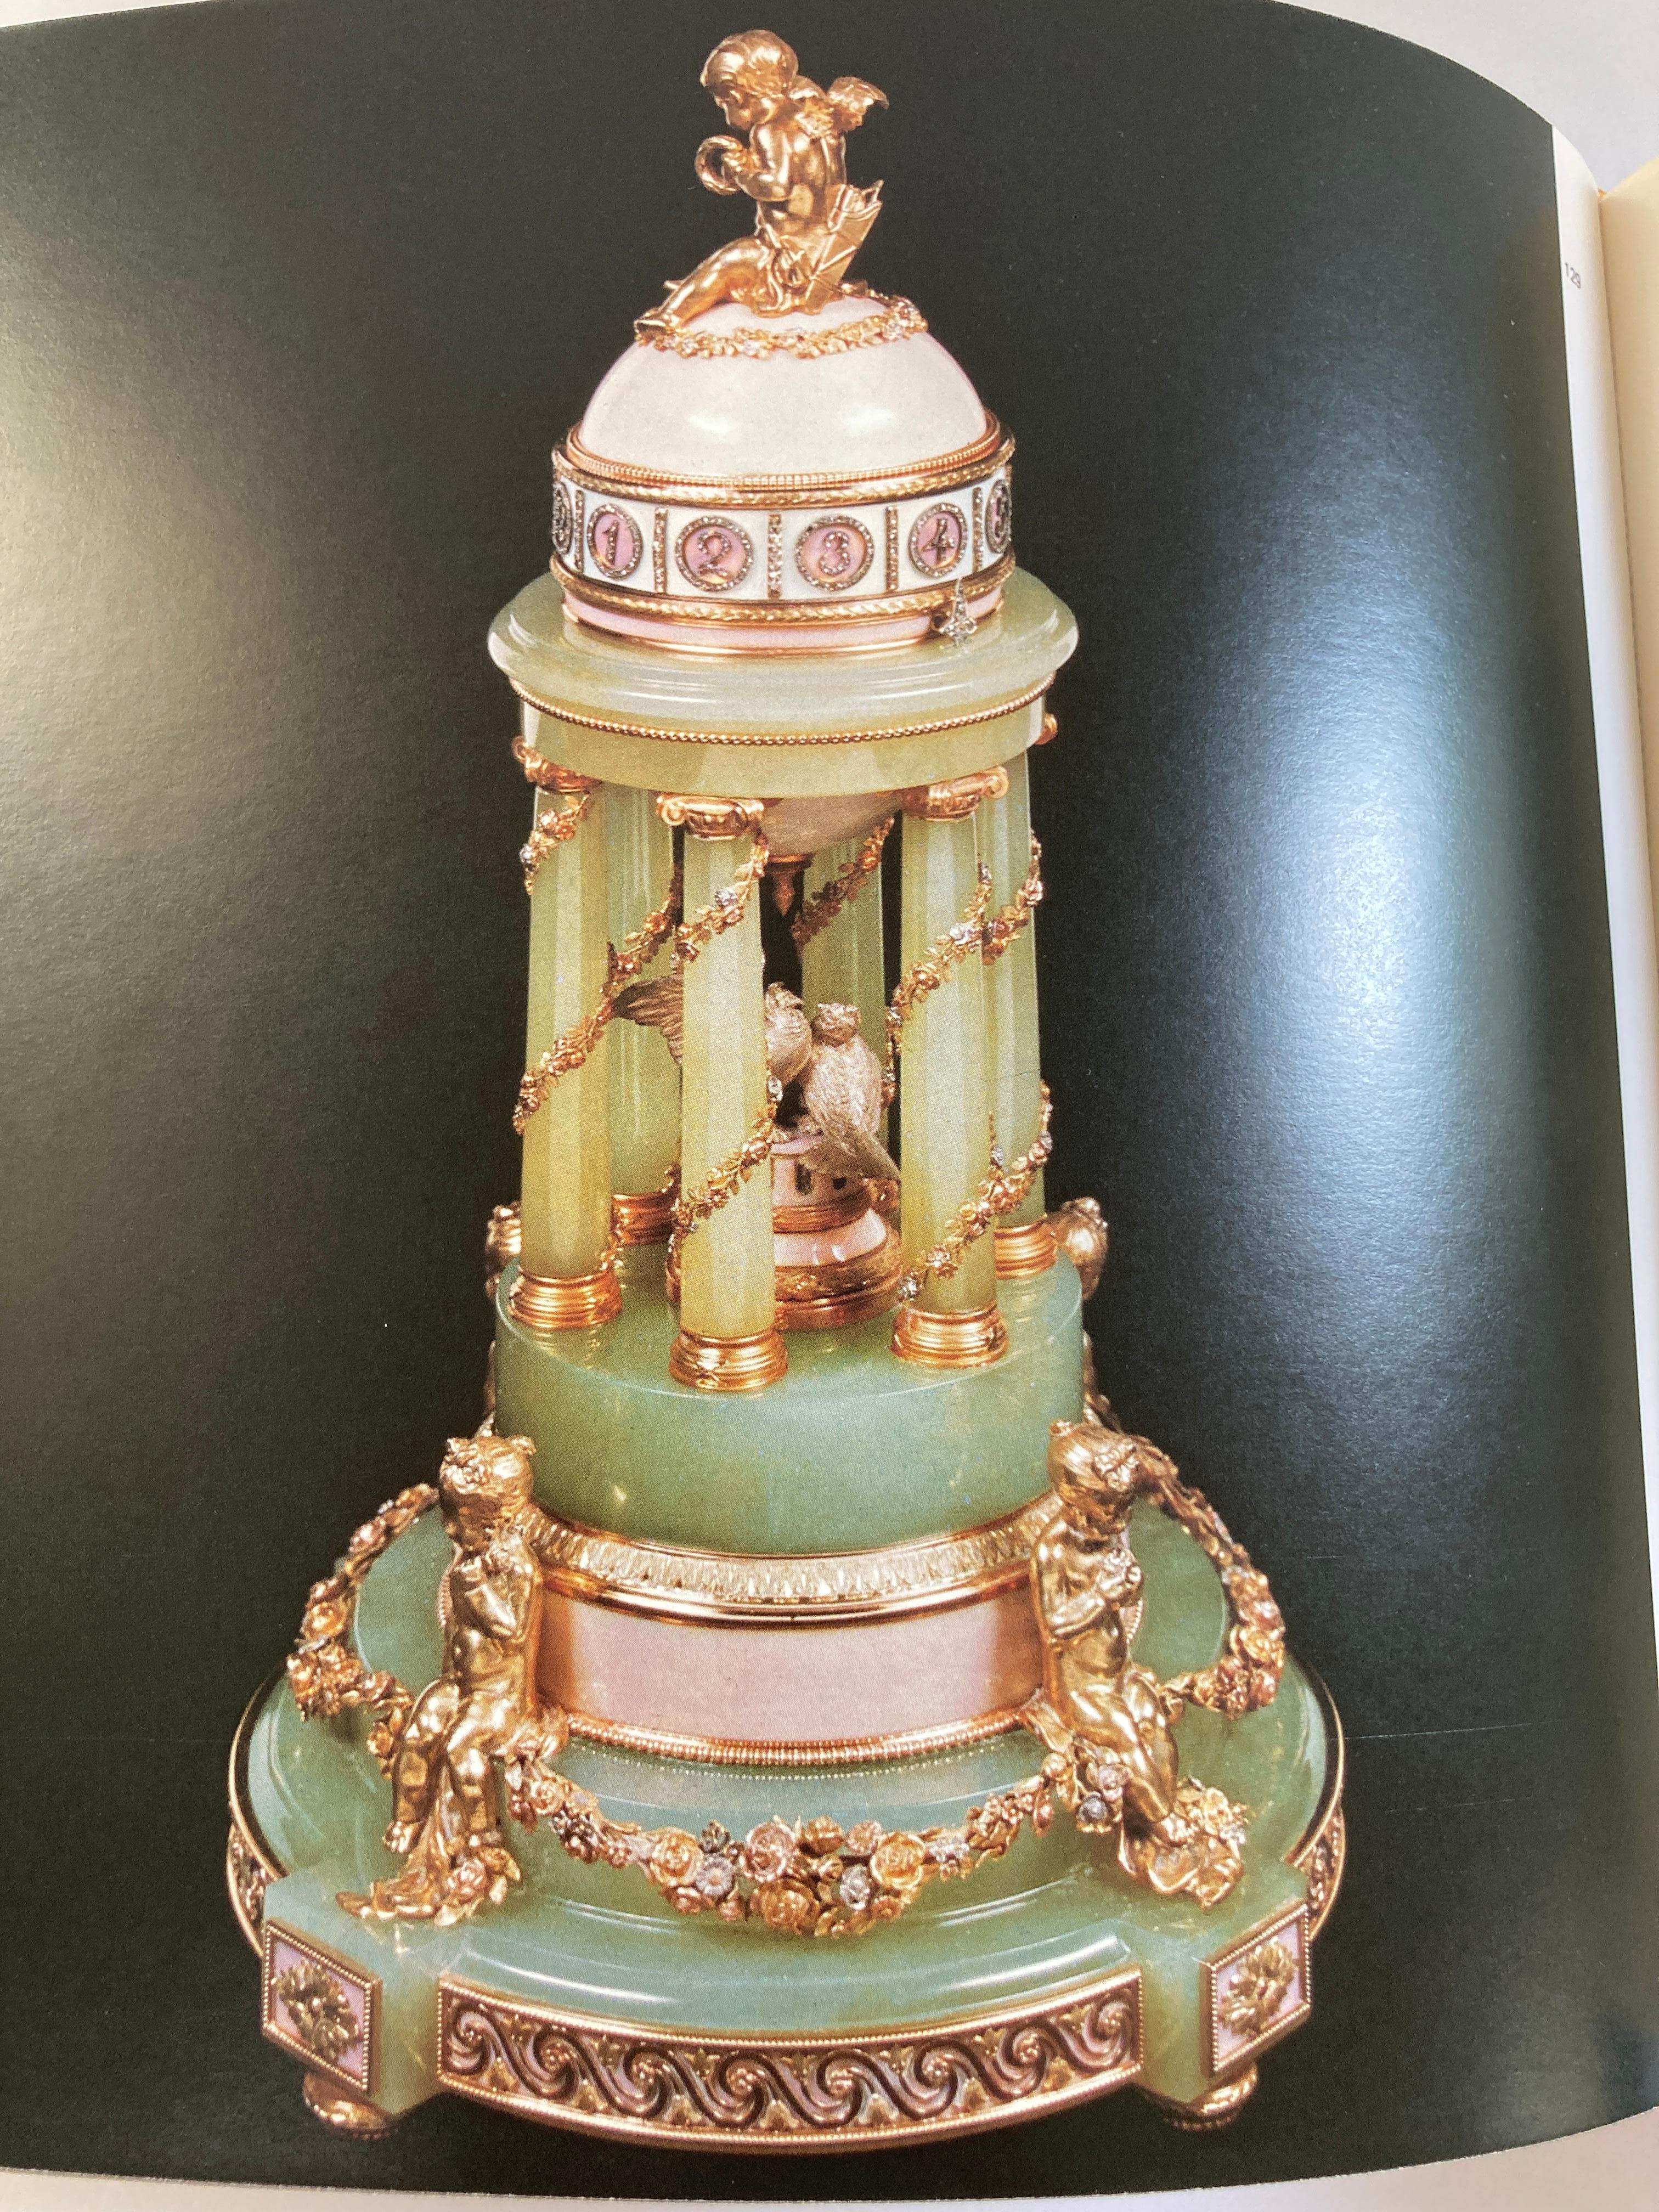 Fabergé Court Jeweler to the Tsars Hardcover Table Book In Good Condition For Sale In North Hollywood, CA